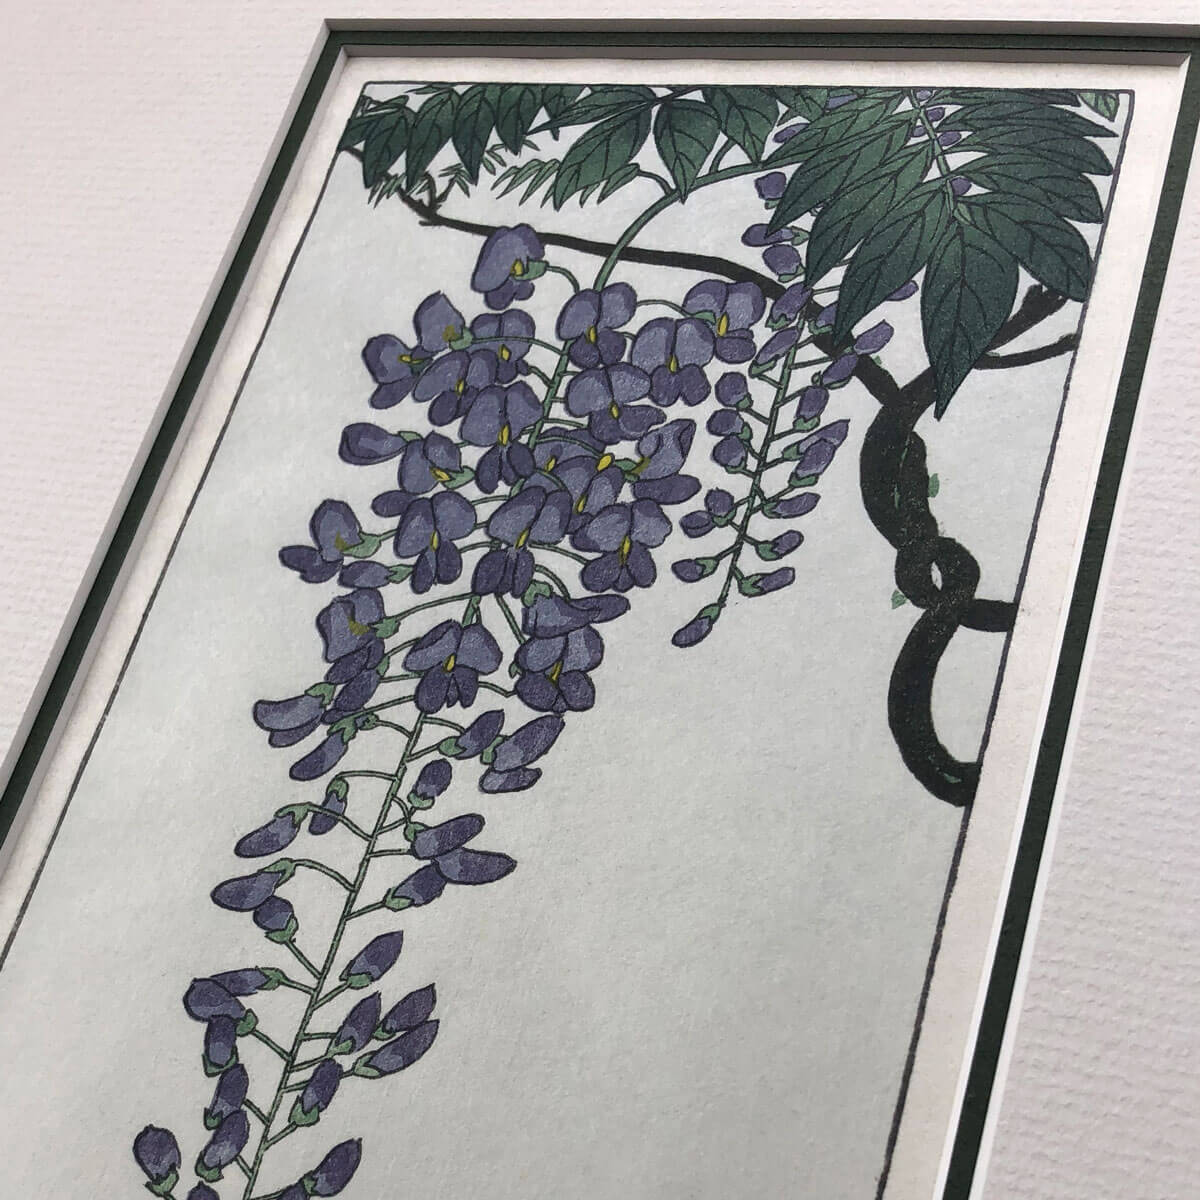 handmade print of flowering wisteria after Koson featuring purple wisteria flower hanging from branch against pale blue background